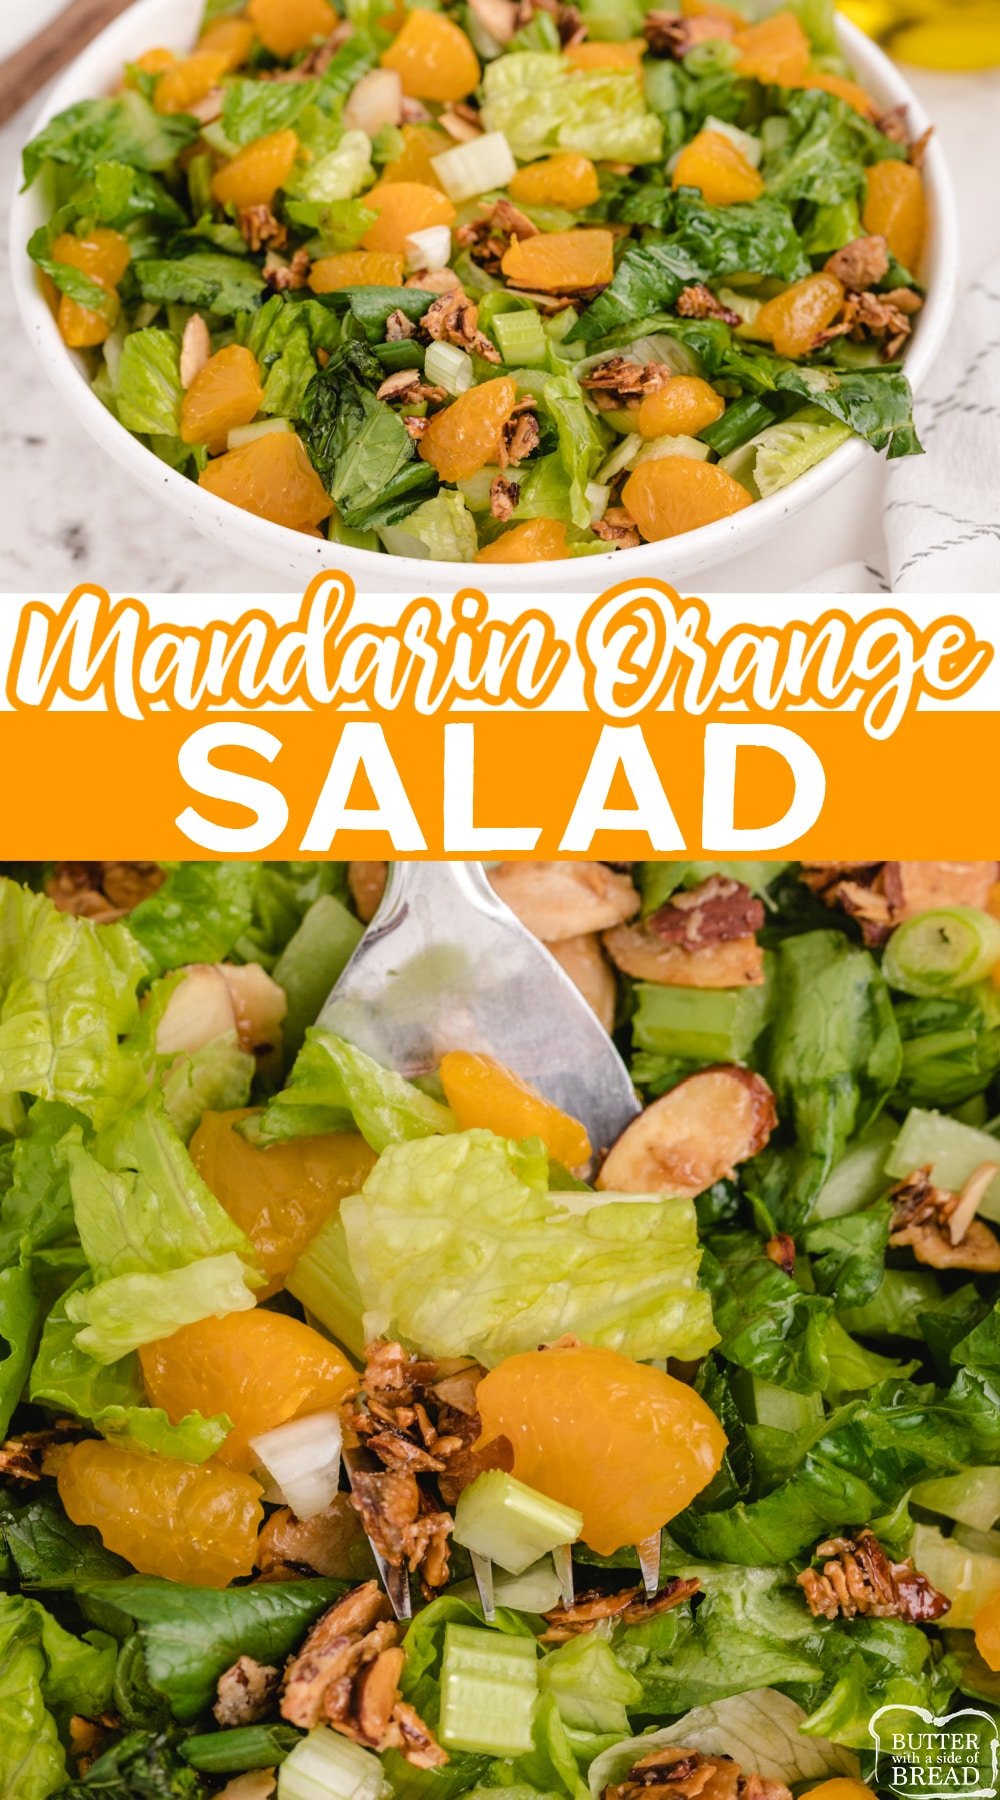 Mandarin Orange Salad made with lettuce, sugared almonds, mandarin oranges and a simple, sweet homemade salad dressing. Easy to make and pretty enough to take to a dinner party!